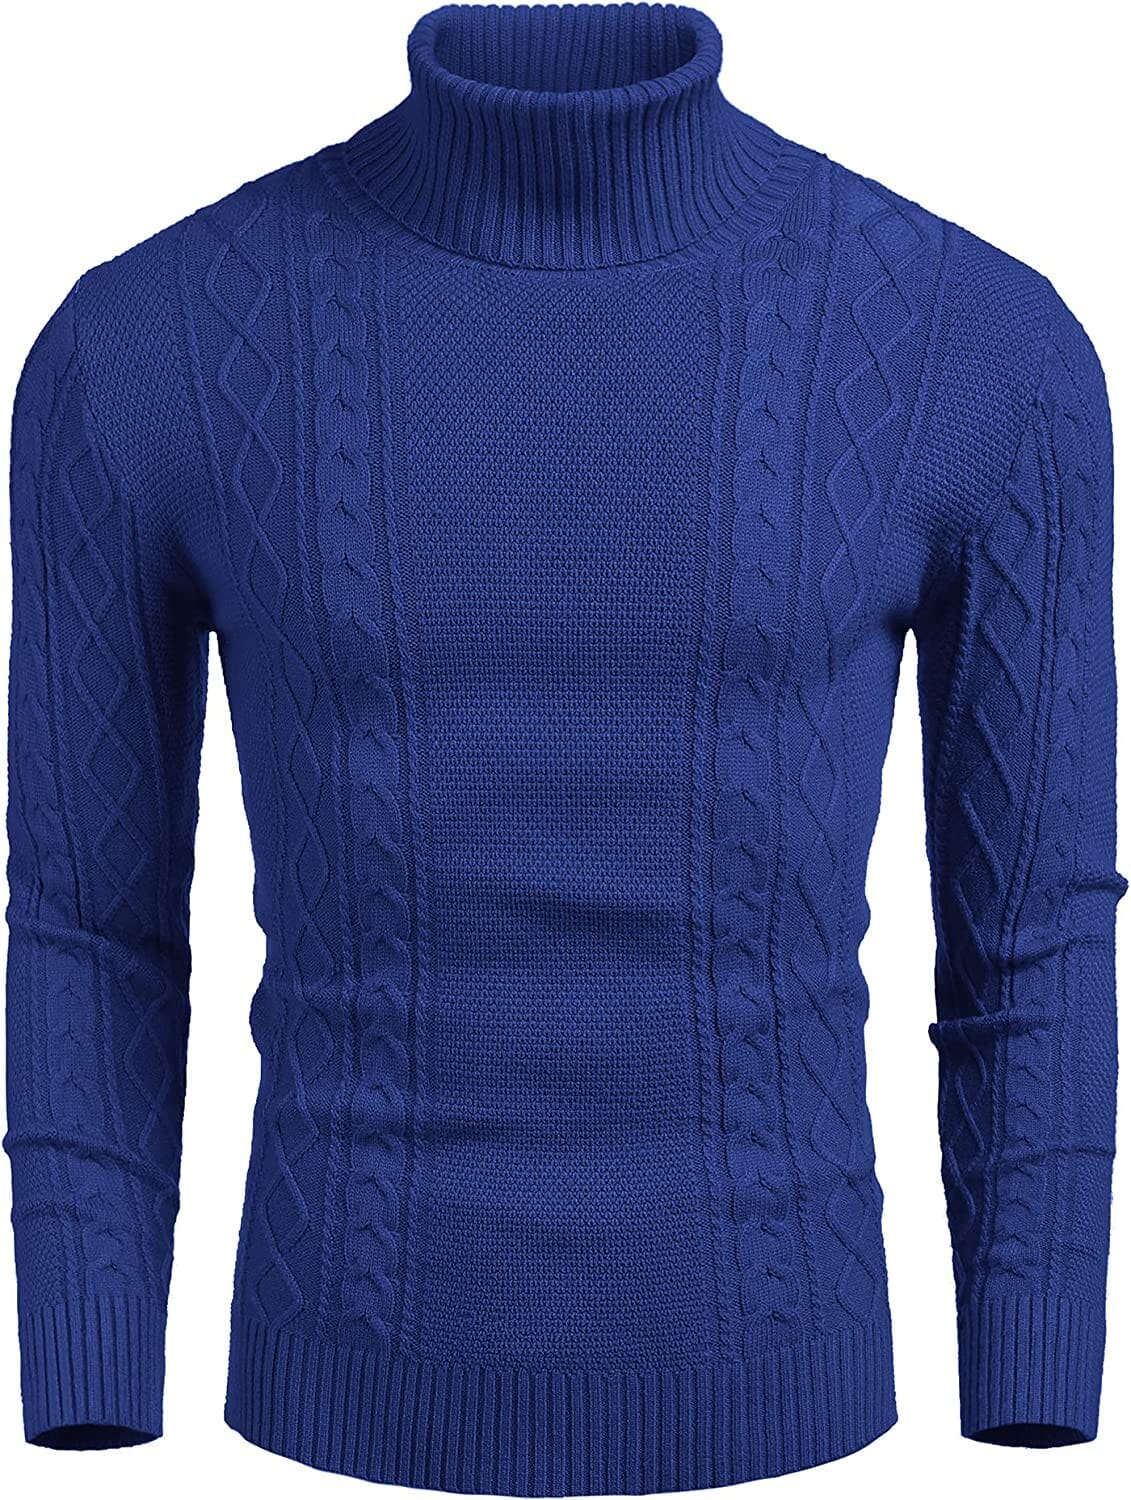 Turtleneck Casual Cable Knitted Pullover Sweaters (US Only) Fashion Hoodies & Sweatshirts COOFANDY Store Royal Blue S 